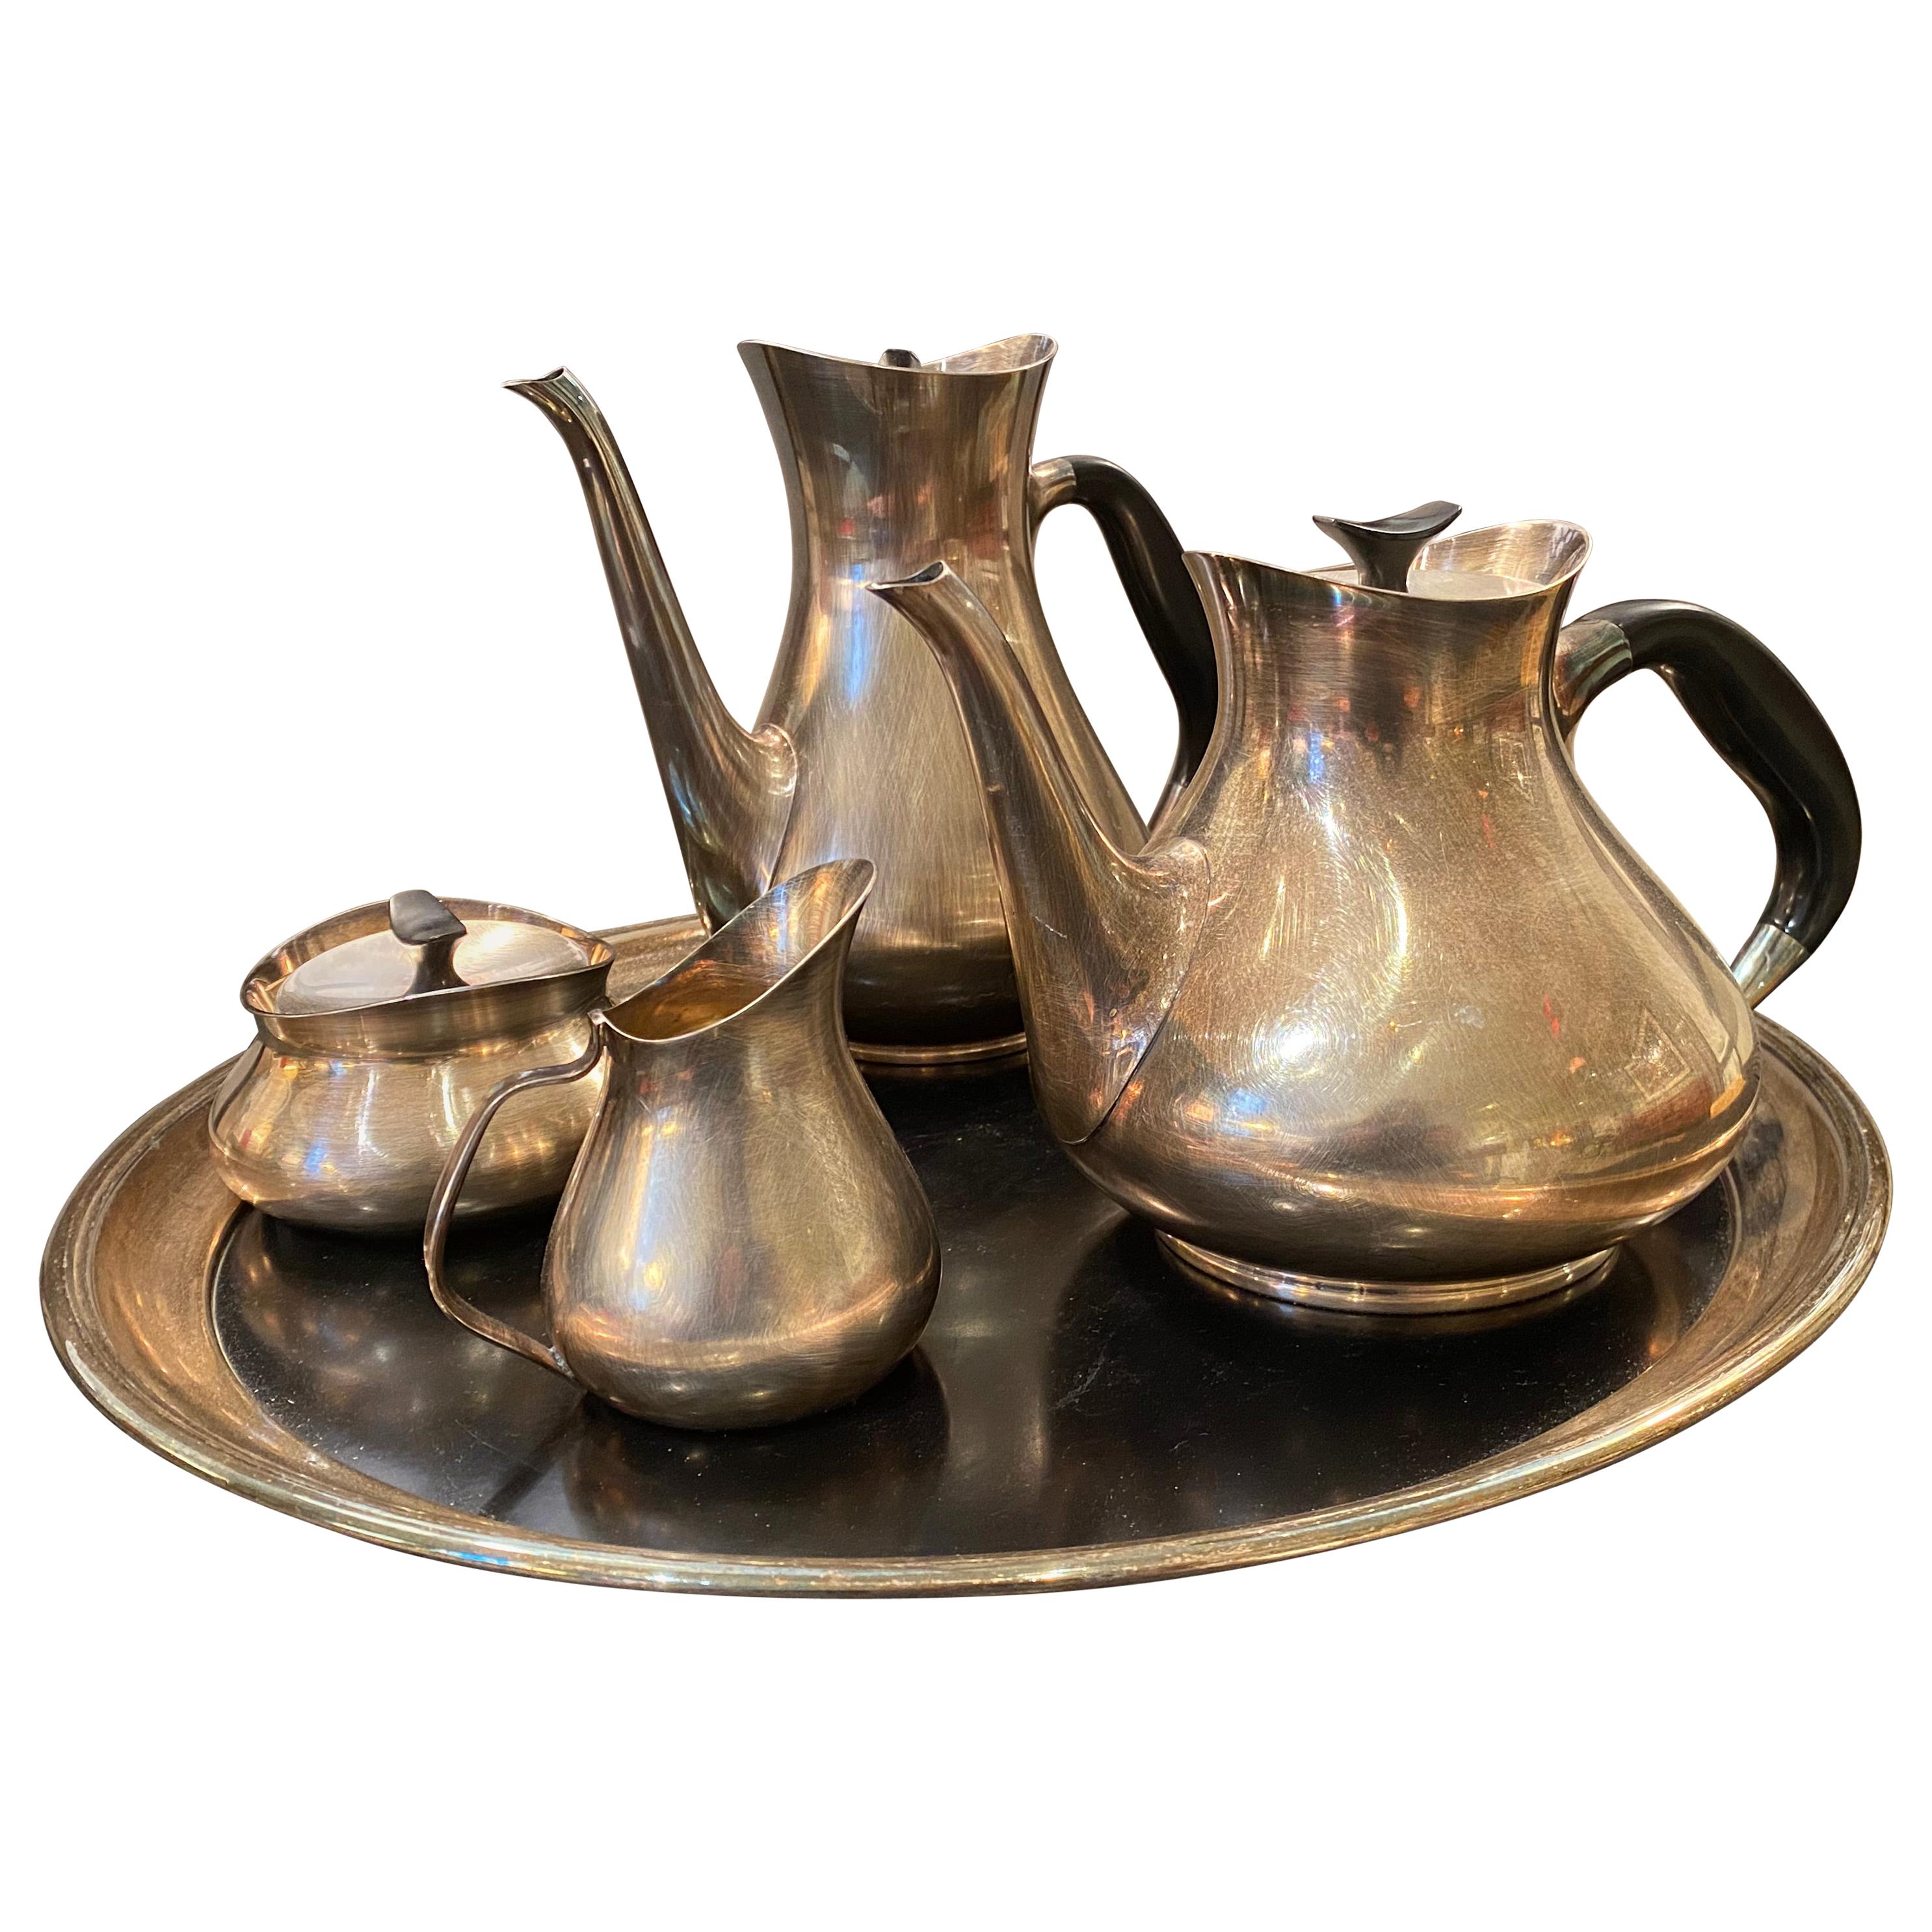 Danish Silver Plated Tea and Coffee Set by Hans Bunde for Cohr